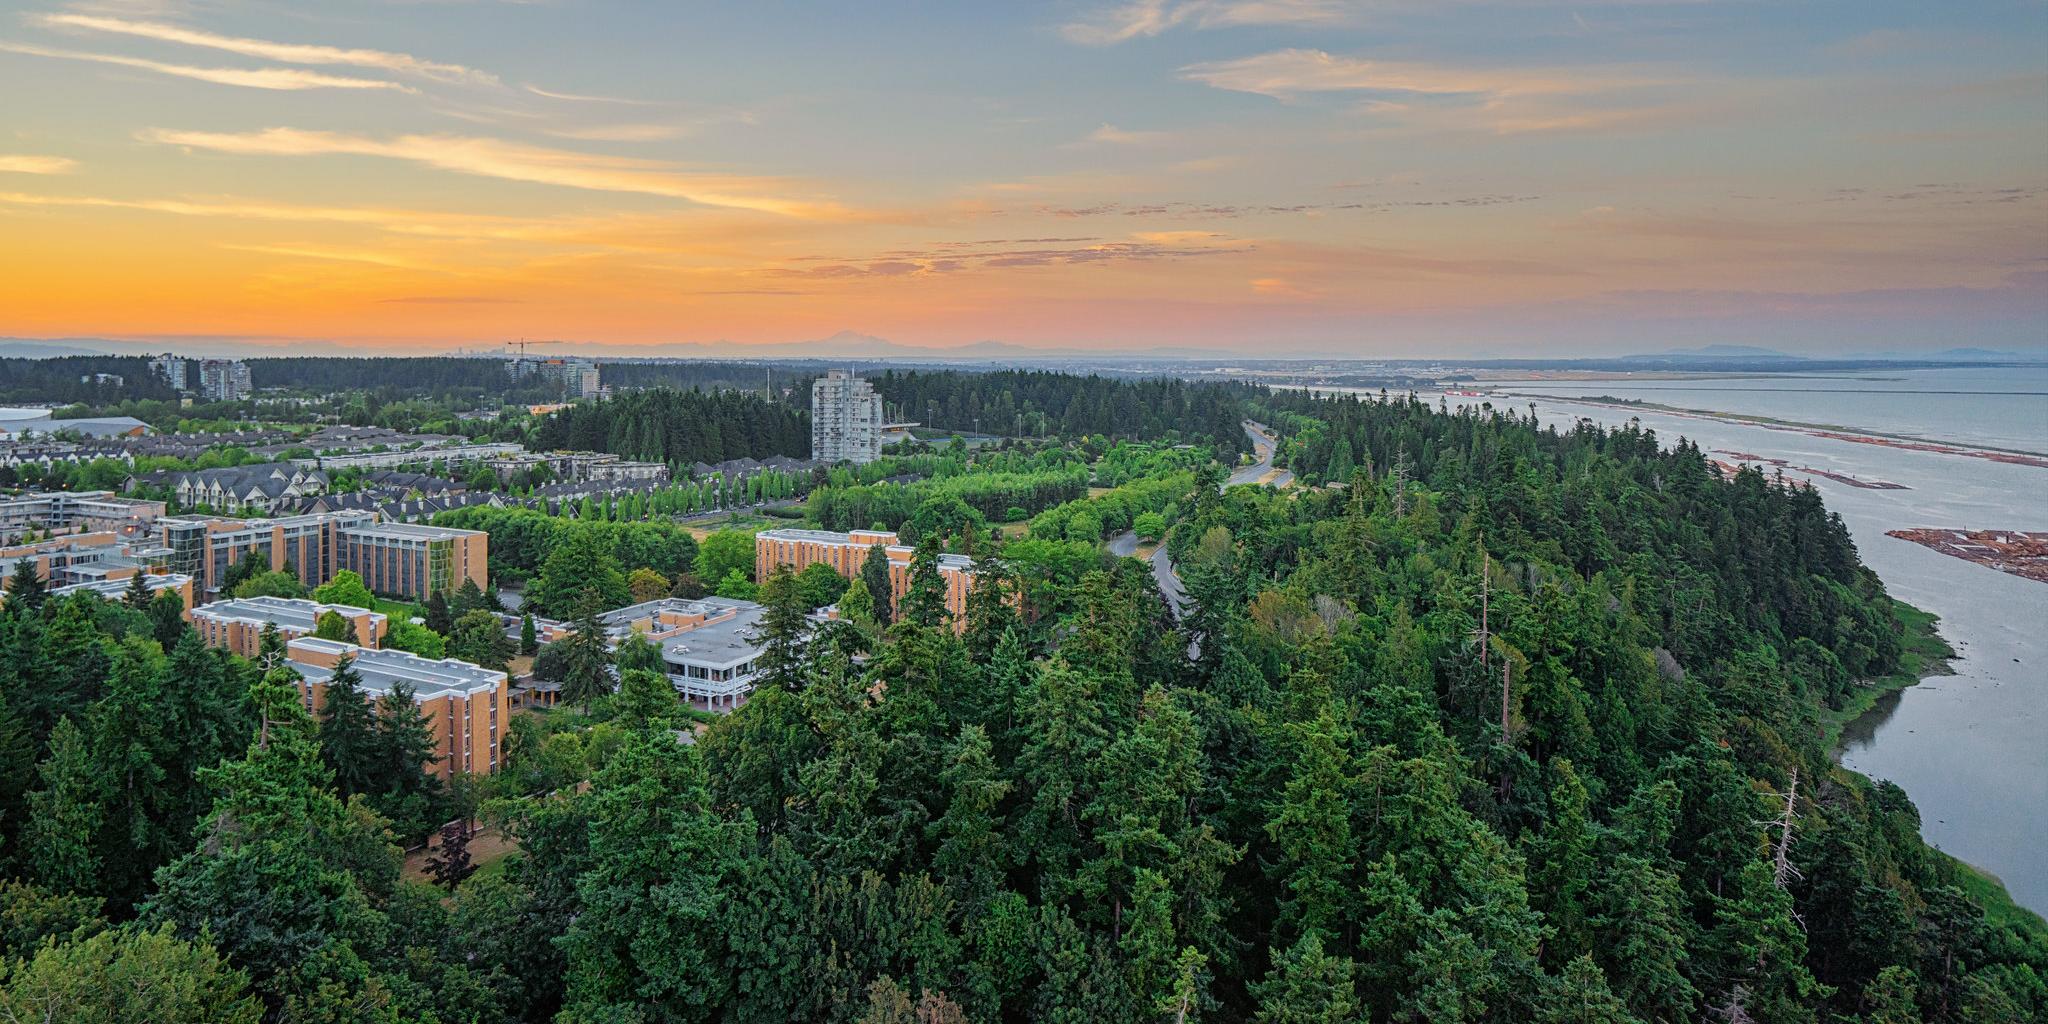  UBC Vancouver aerial view